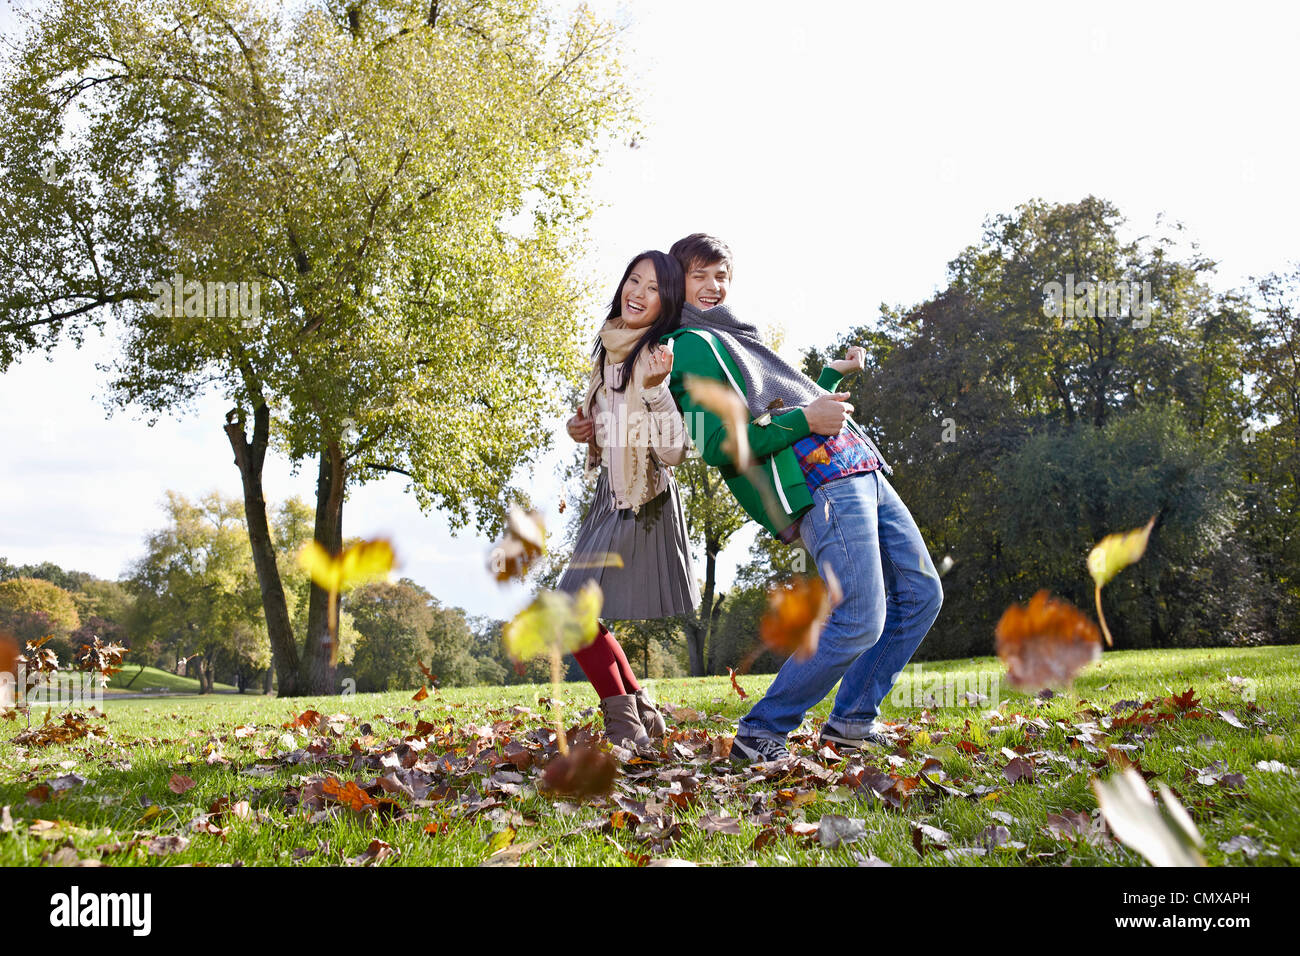 Germany, Cologne, Young couple in park, smiling, portrait Stock Photo